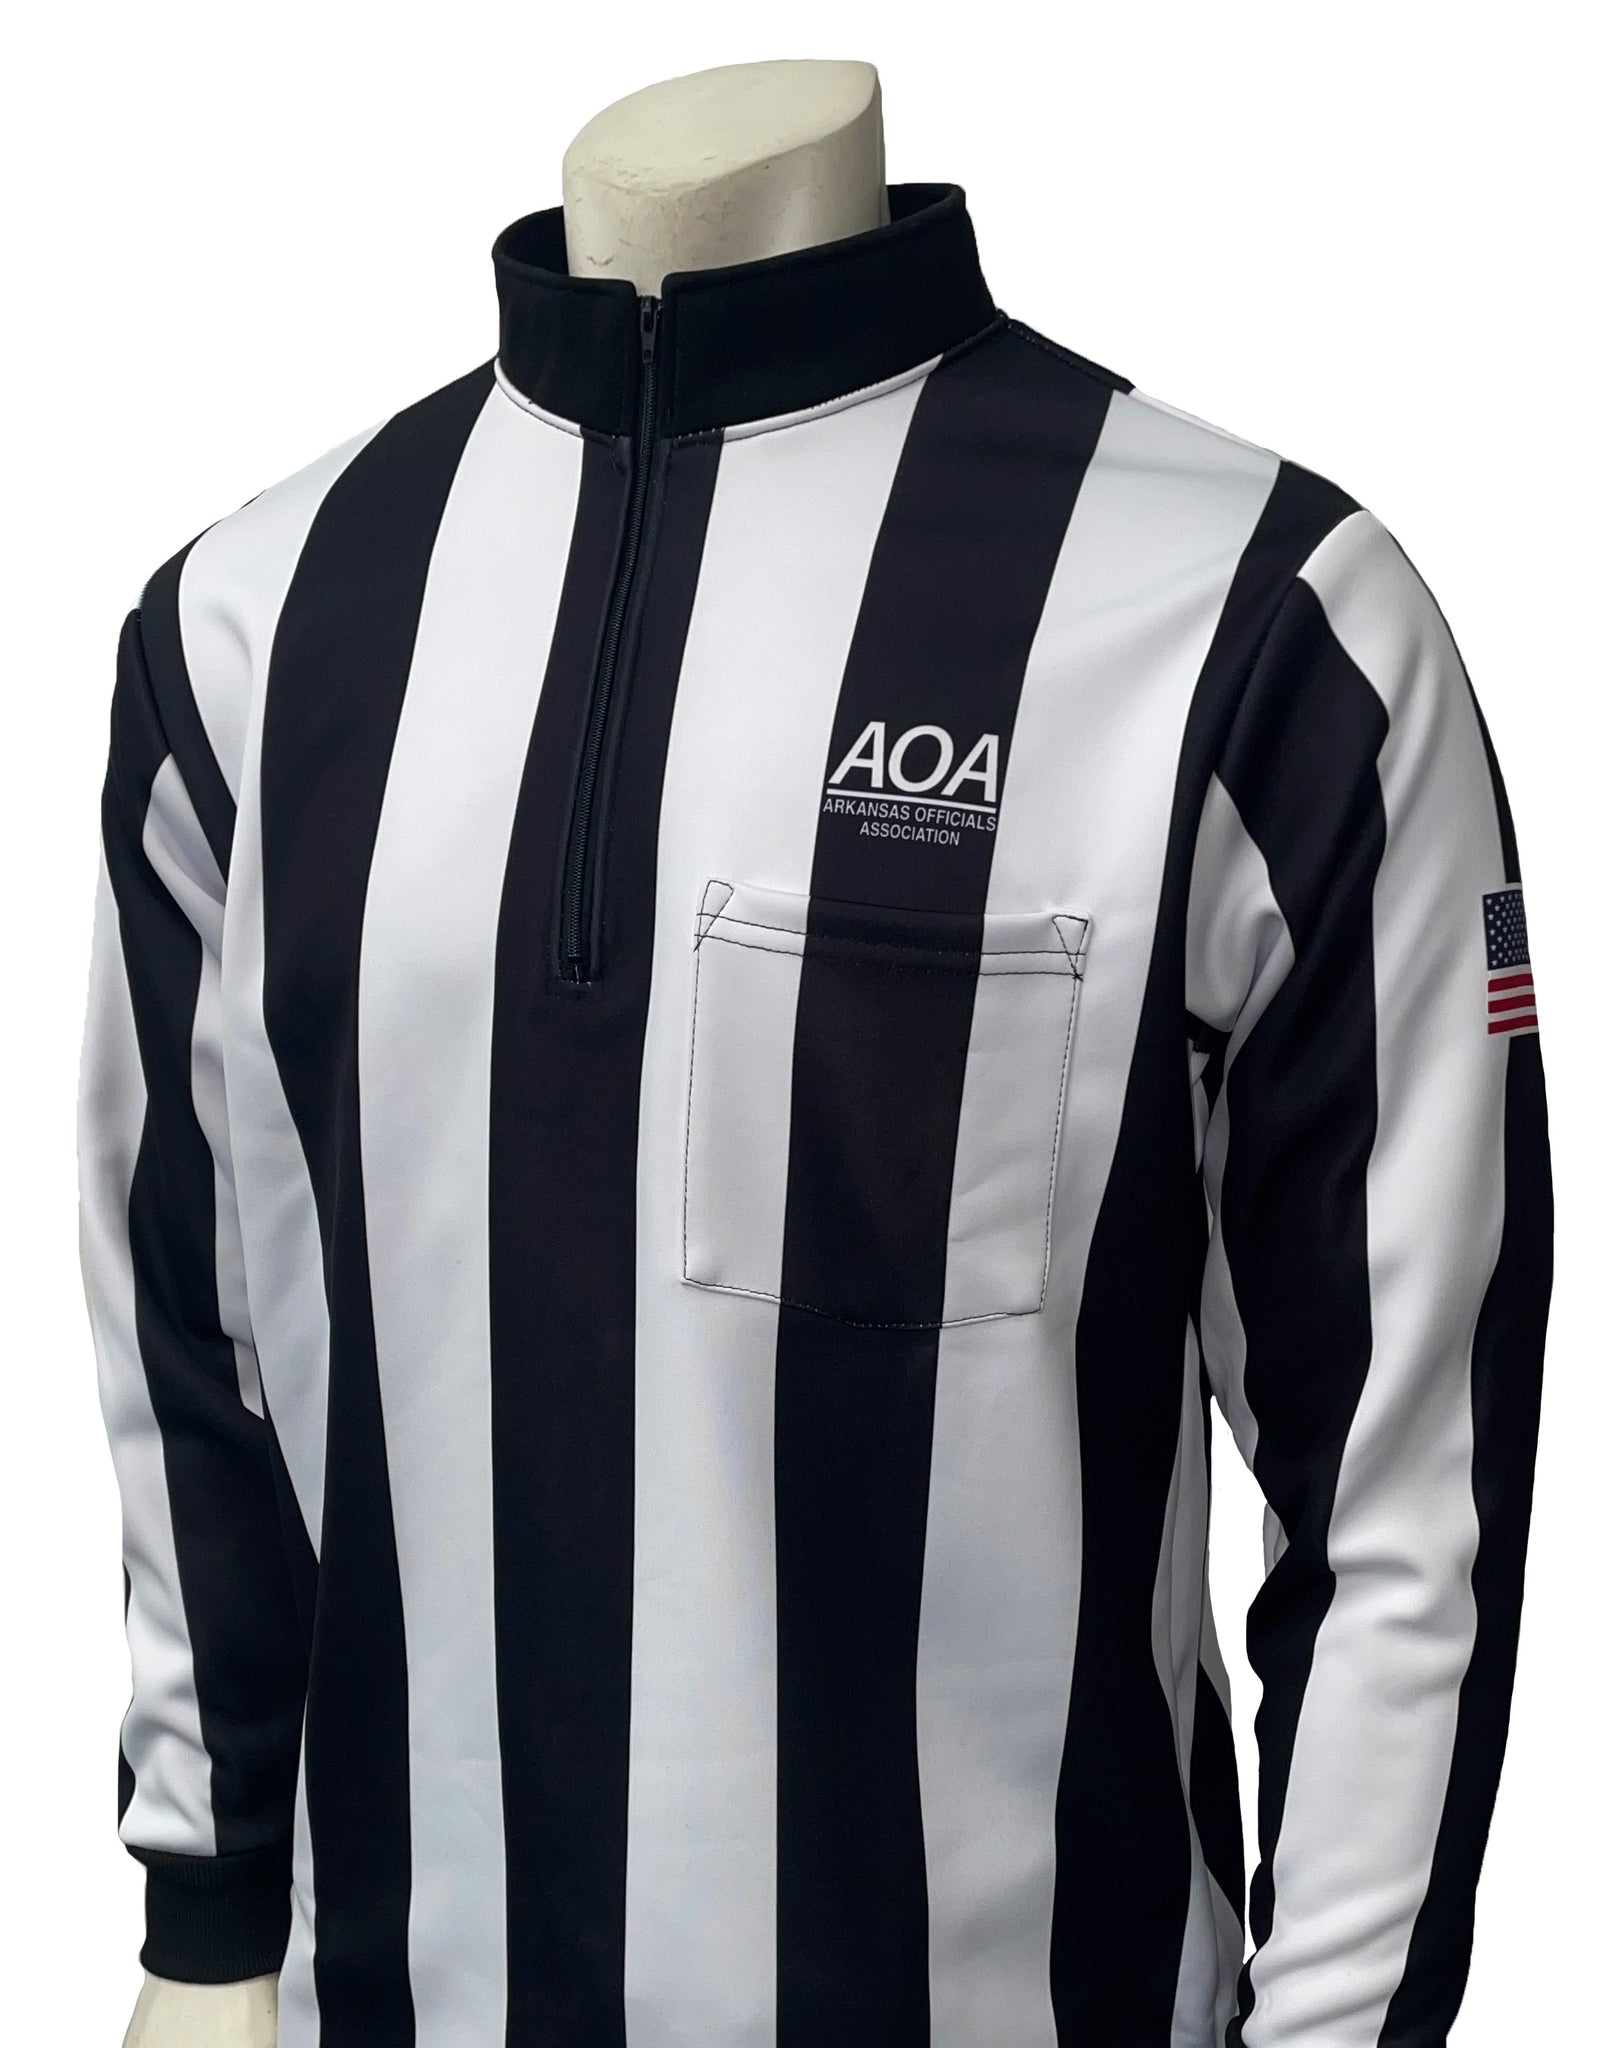 USA730AR - Smitty "Made in USA" - Dye Sub Arkansas Foul Weather Water Resistant Football Long Sleeve Shirt